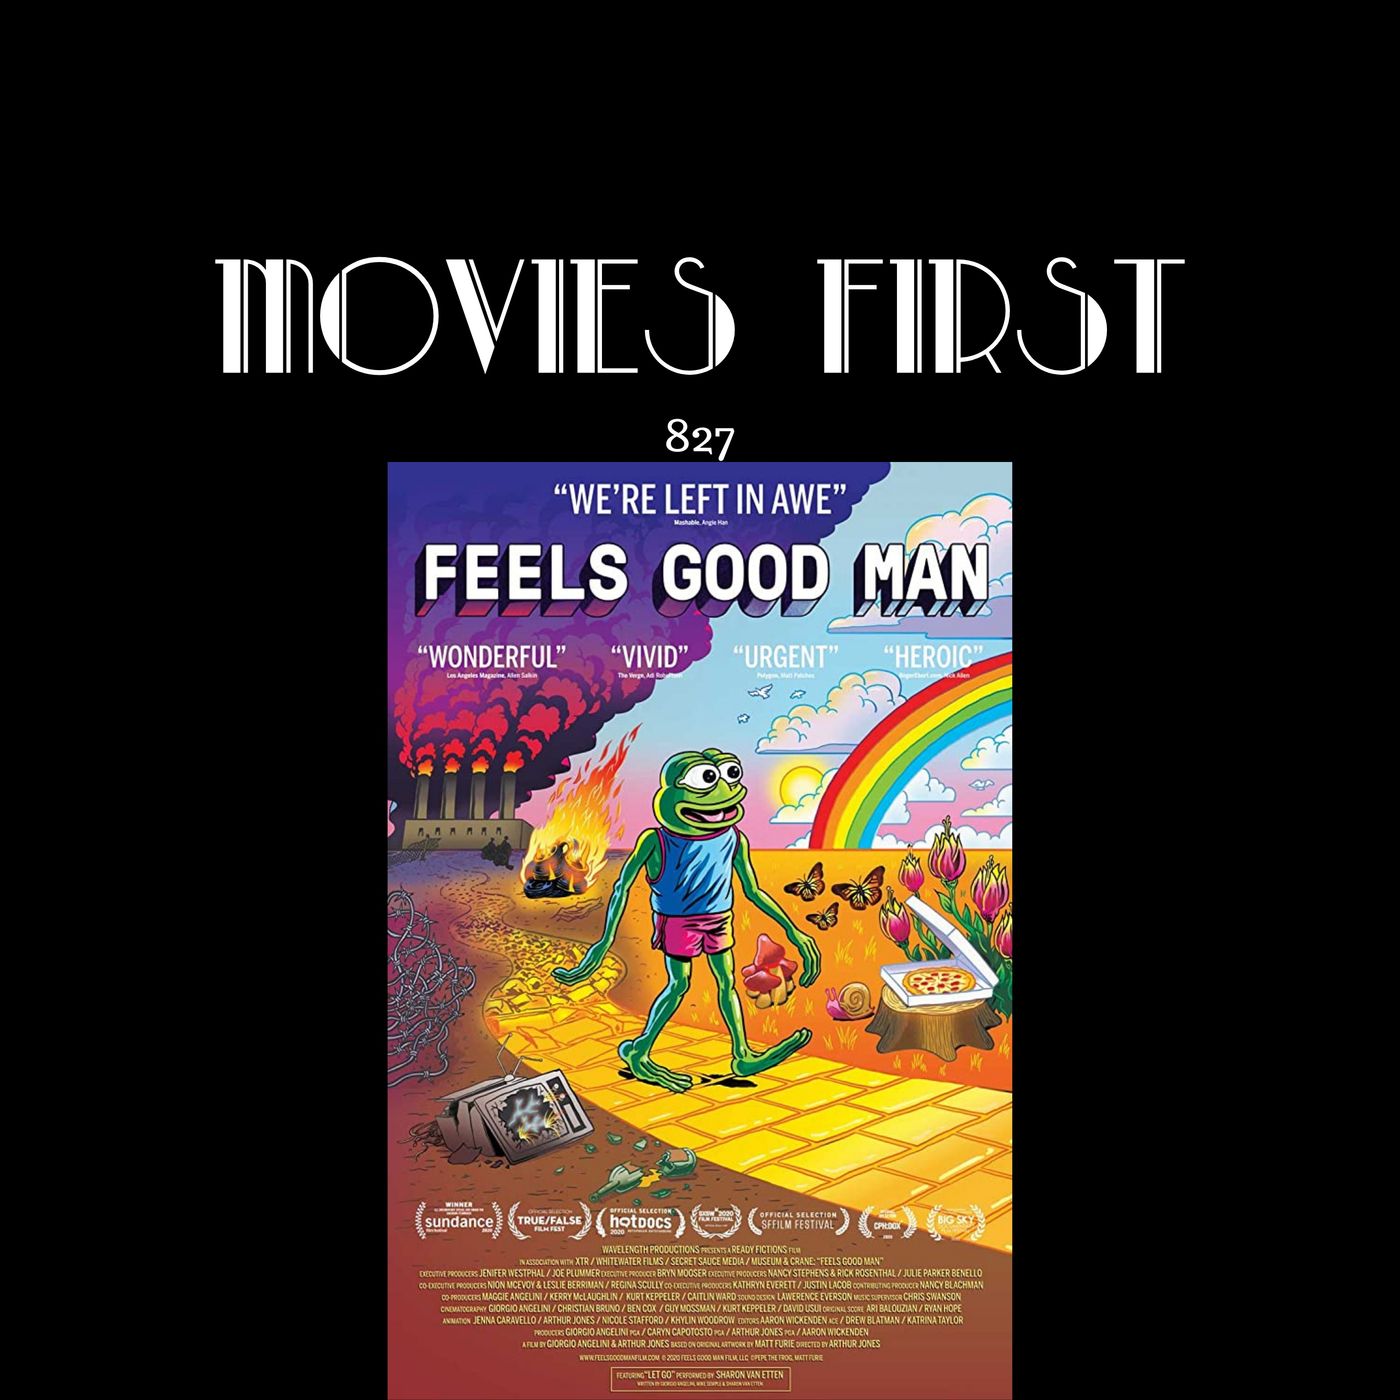 Feels Good Man (Comedy, Documentary) (the @MoviesFirst review)